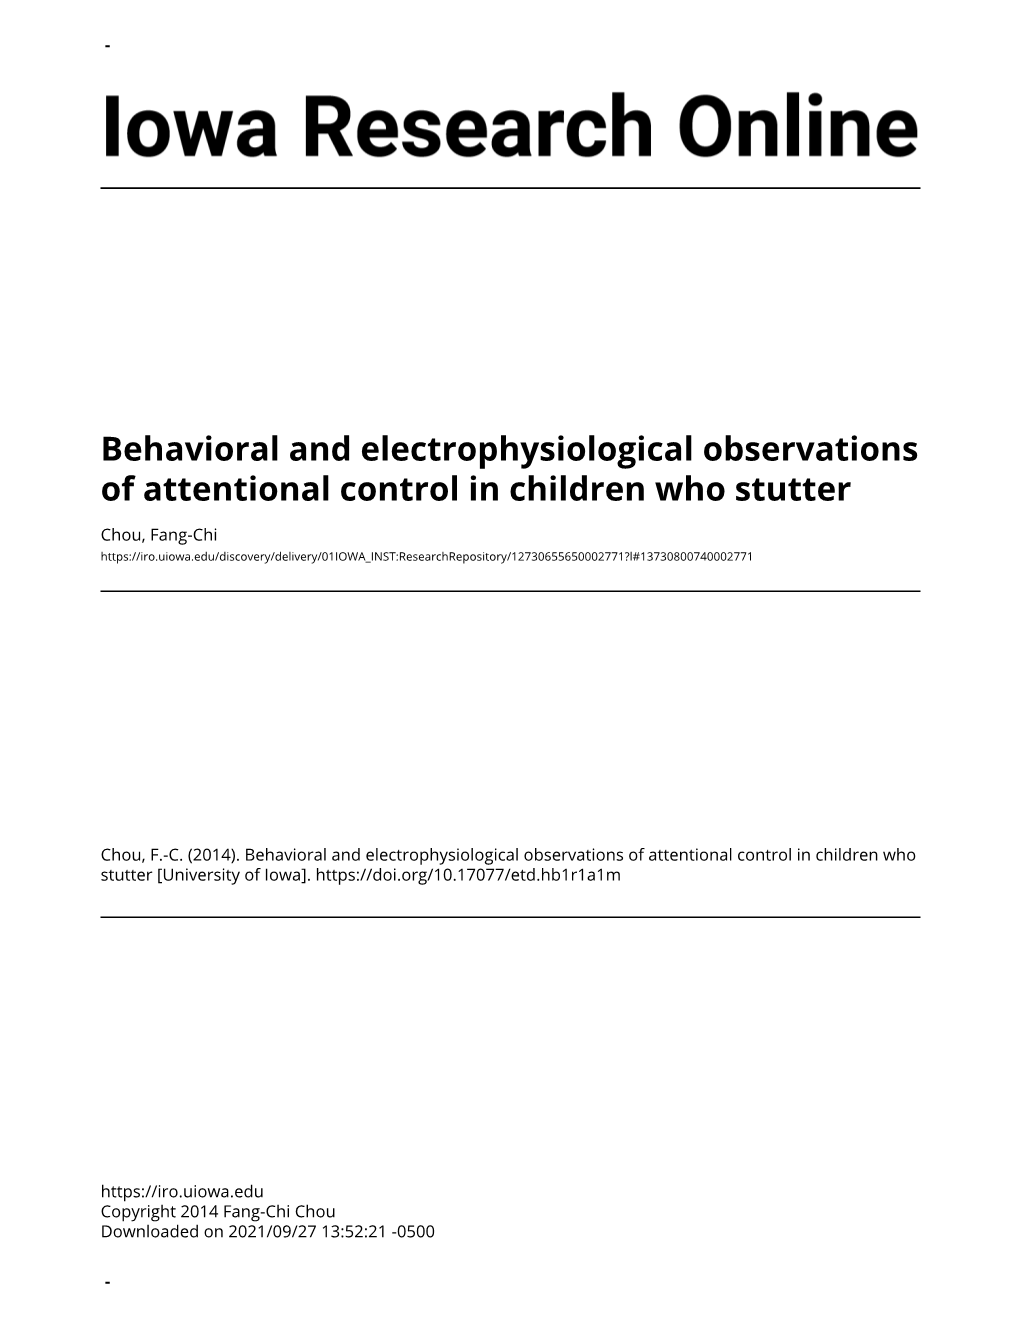 Behavioral and Electrophysiological Observations of Attentional Control in Children Who Stutter